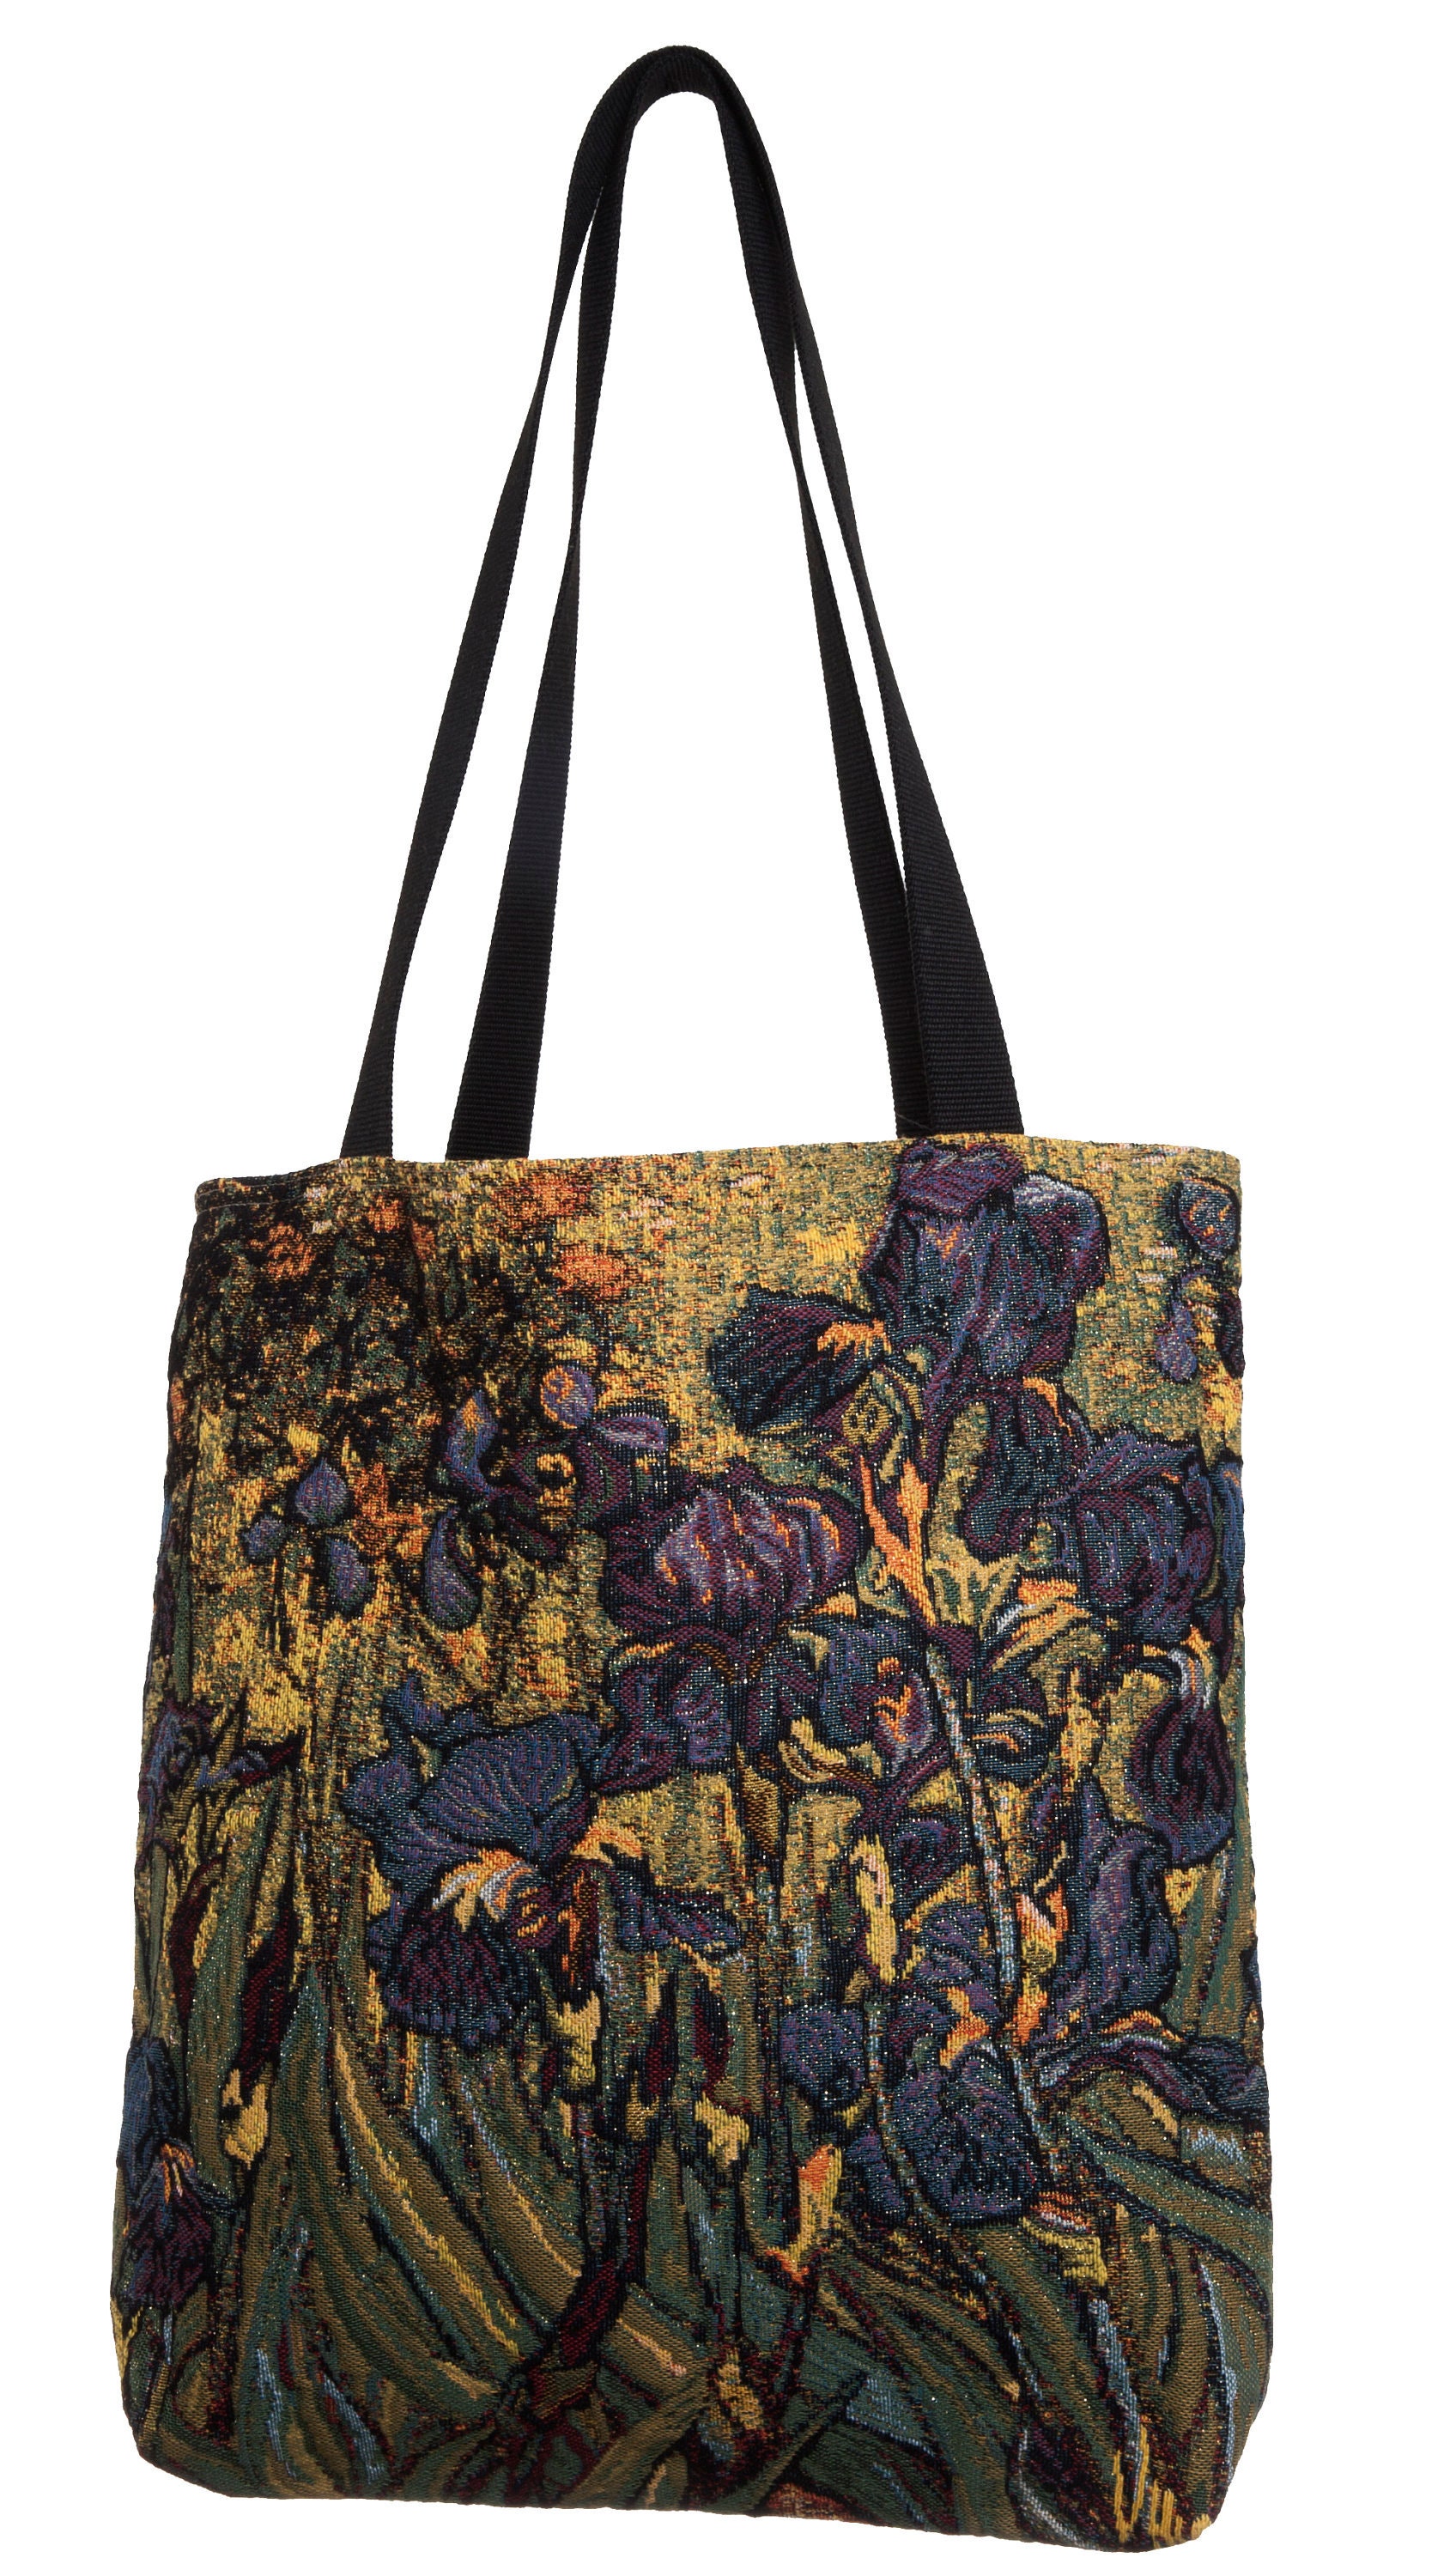 Tapestry Vintage Bags, Handbags & Cases for sale